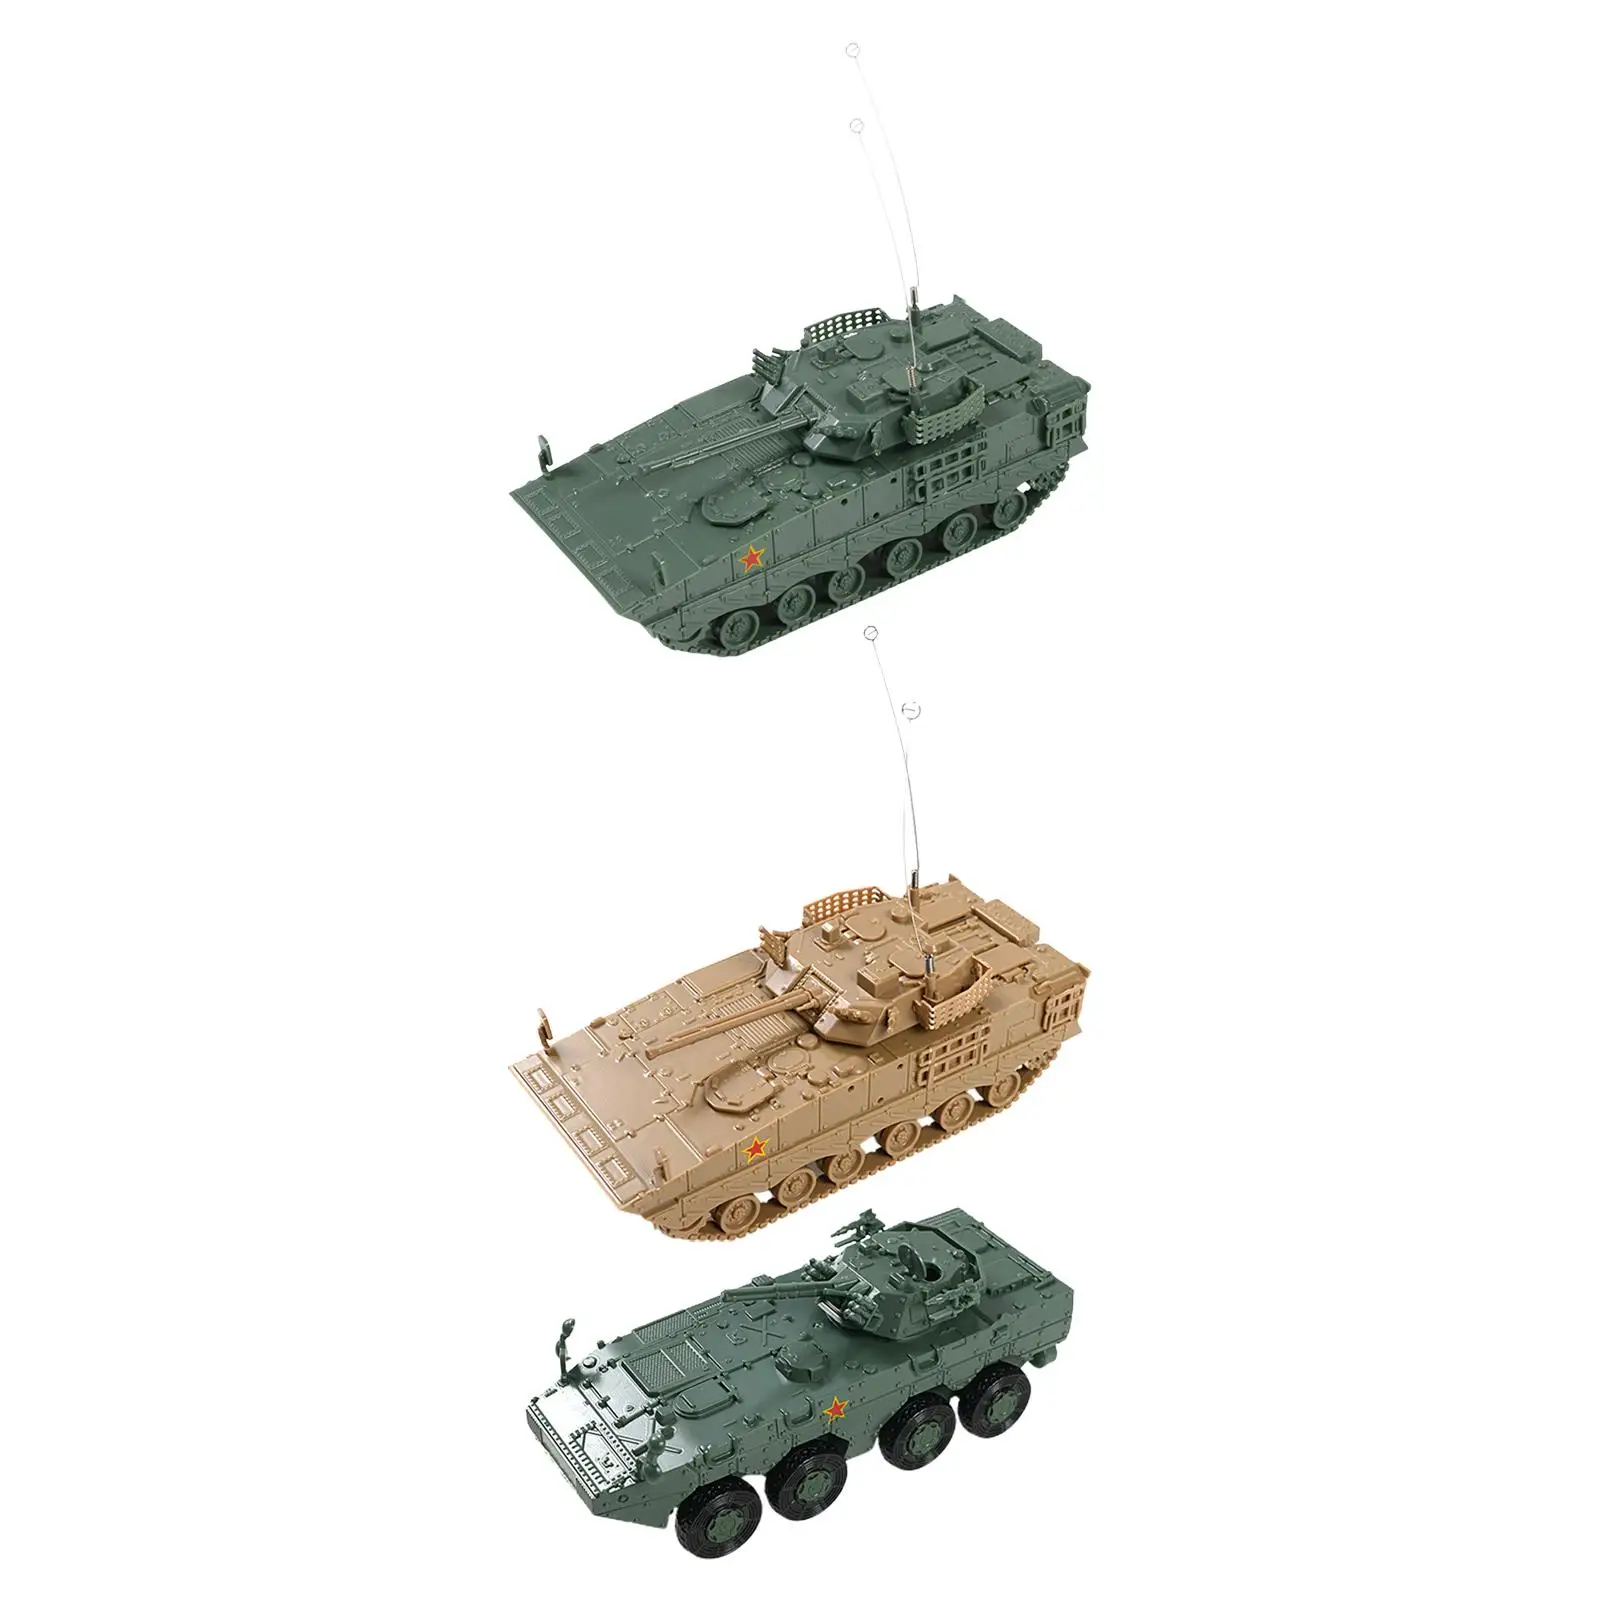 1/72 4D Tank Model Crafts Building Model Kits Chariot Model for Gift Party Favors Collectibles Tabletop Decor Table Scene